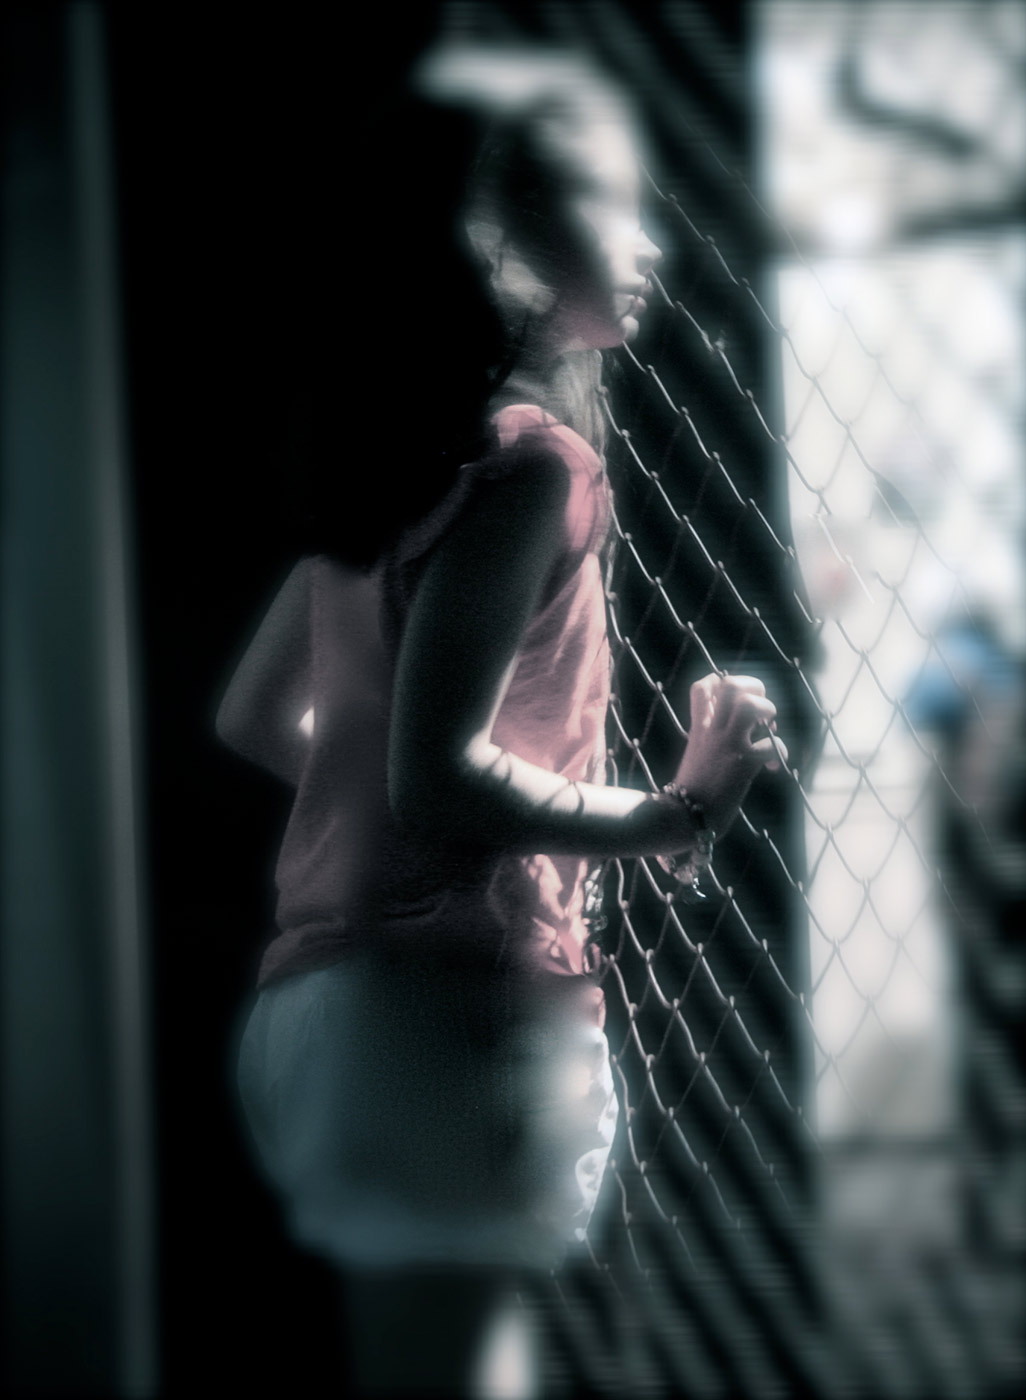 Blurred colour photograph showing a side view of a young girl looking through a wire mesh fence. - click to view larger image